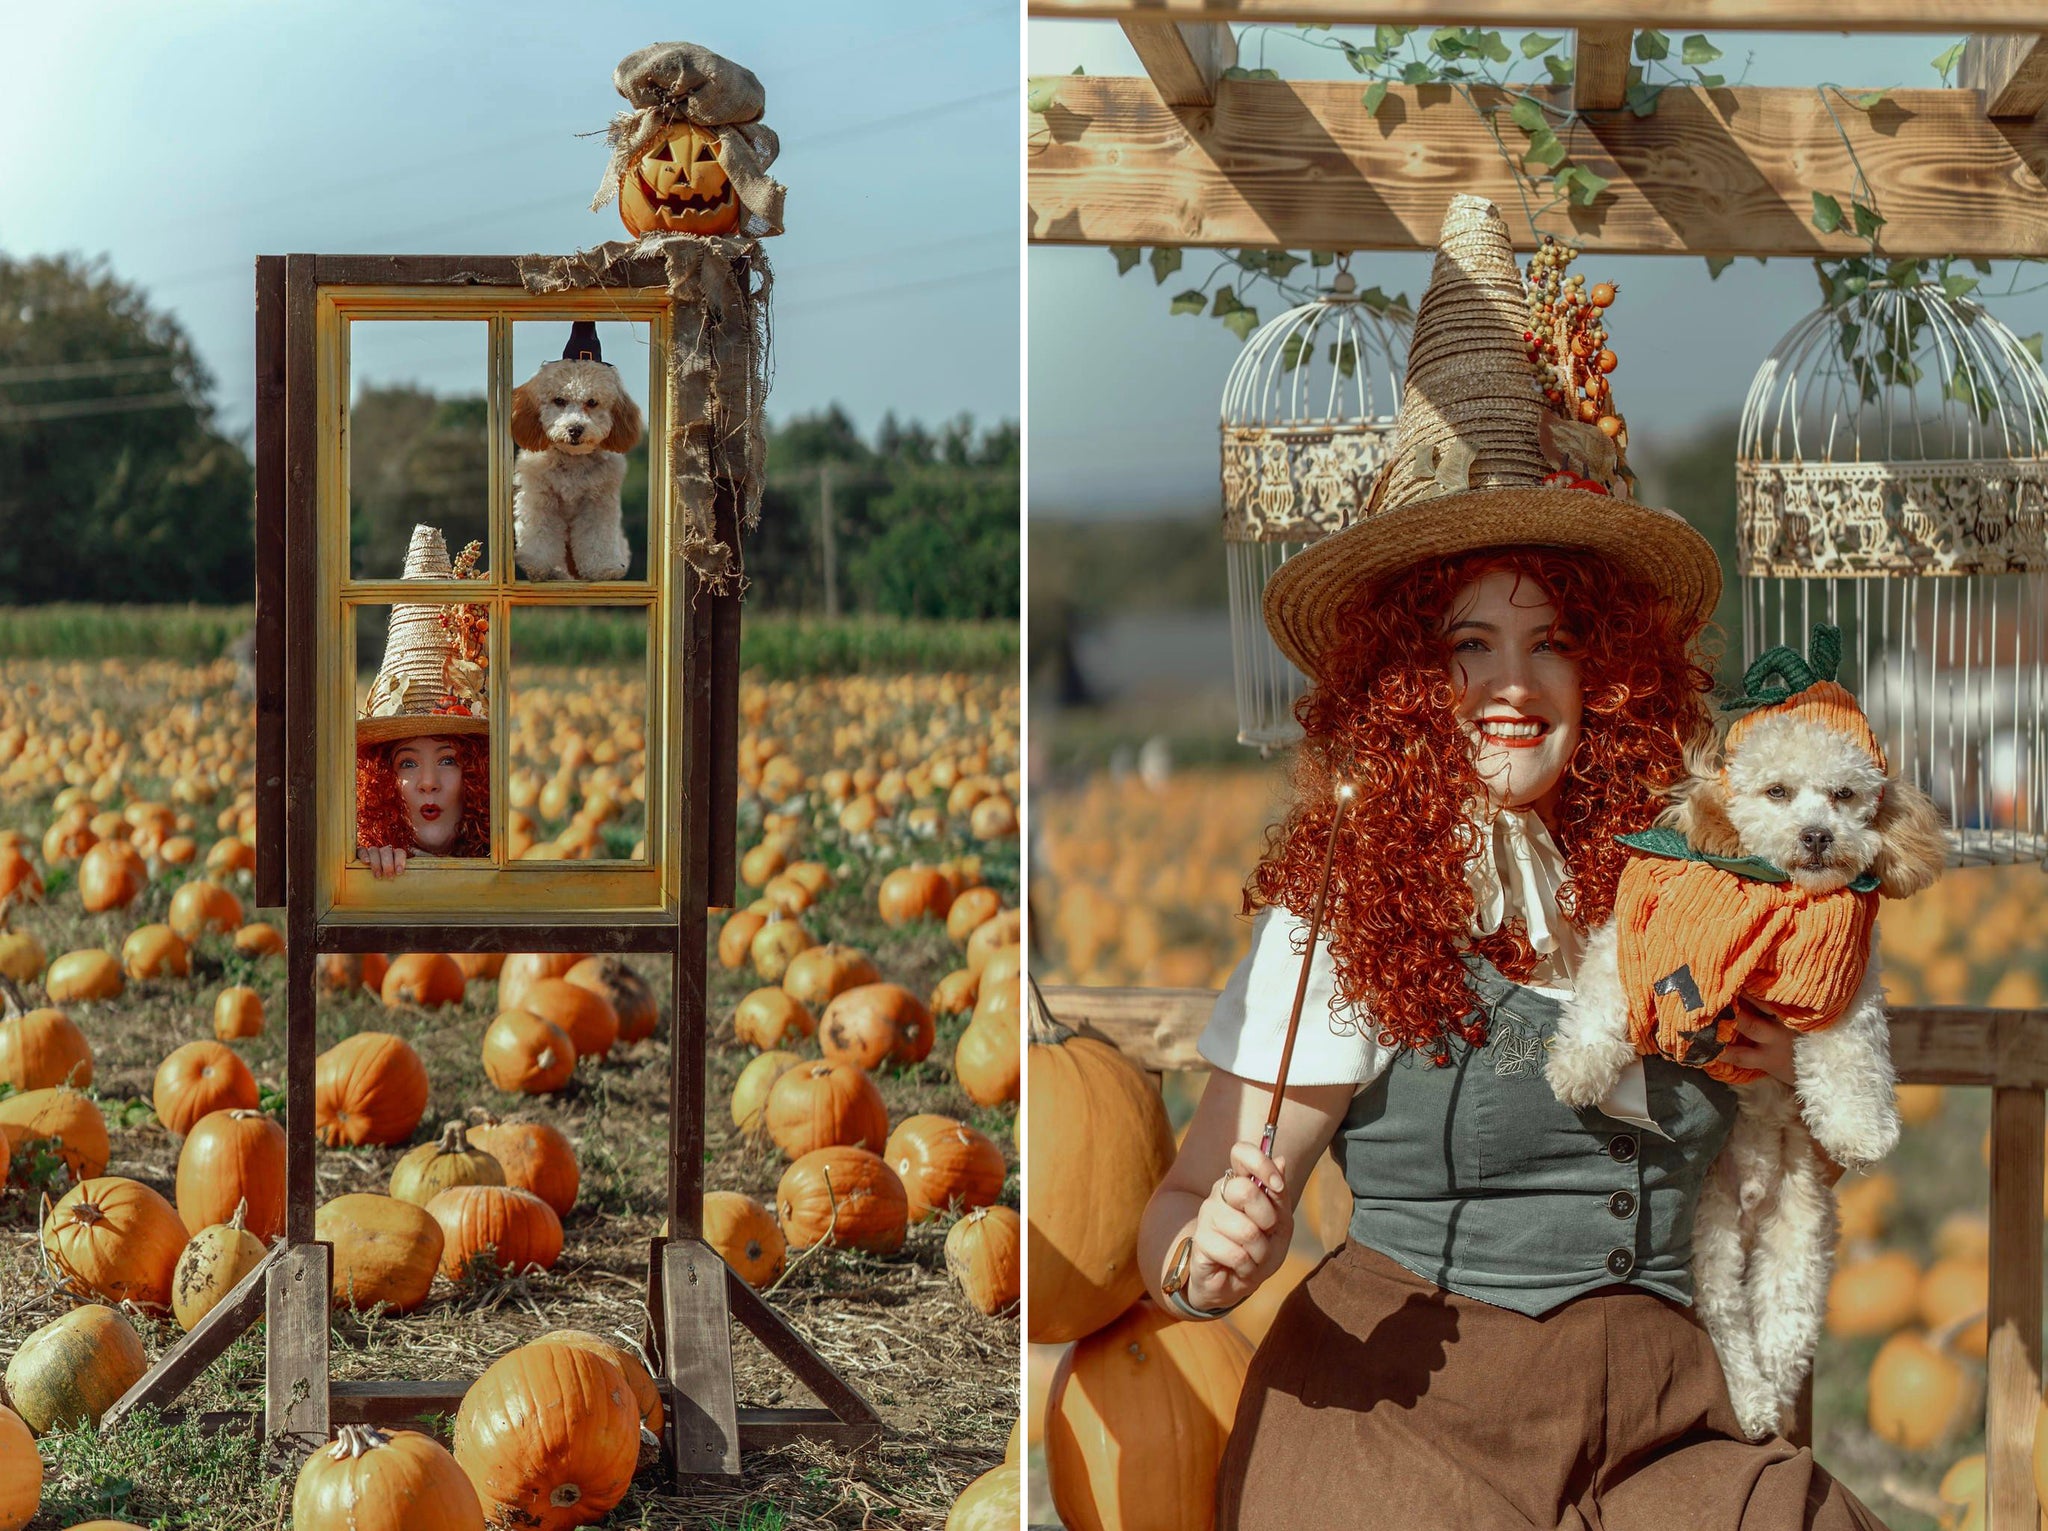 Creative and playful Wizard of Oz inspired photo set by Pascal in field with pumpkins using color tones by onlythecurious